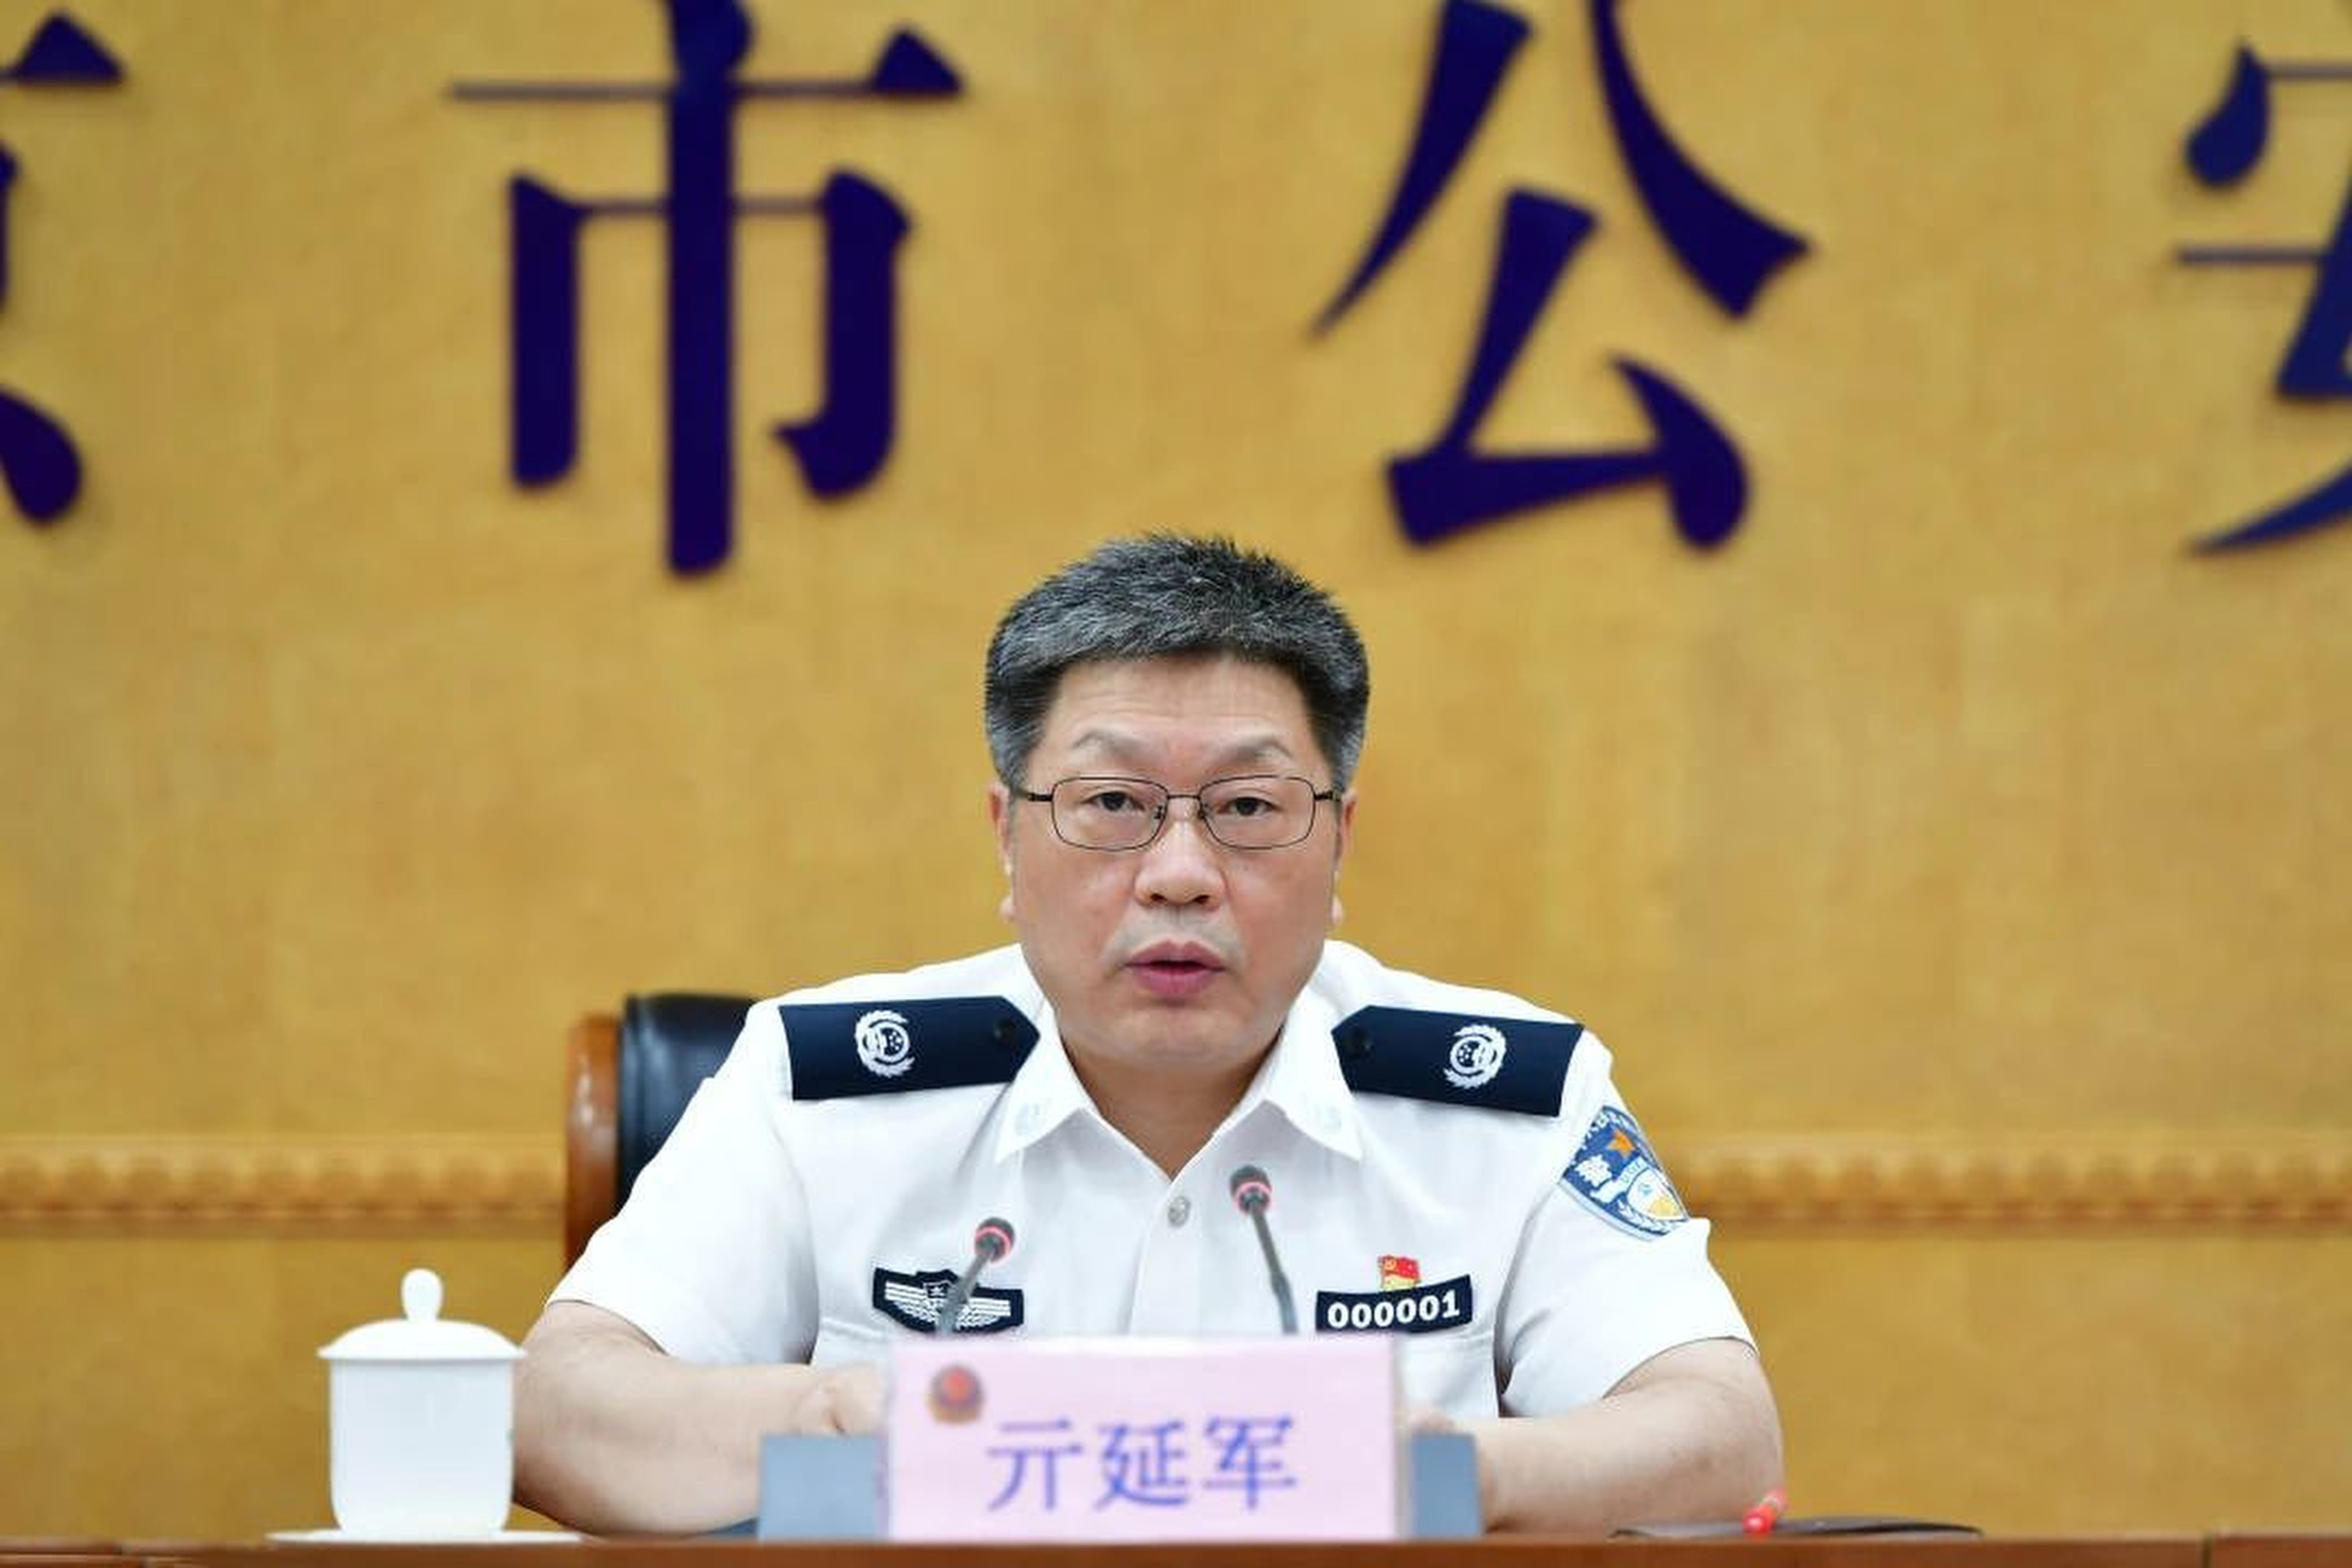 Qi Yanjun has been appointed deputy public security minister. Photo: Weibo